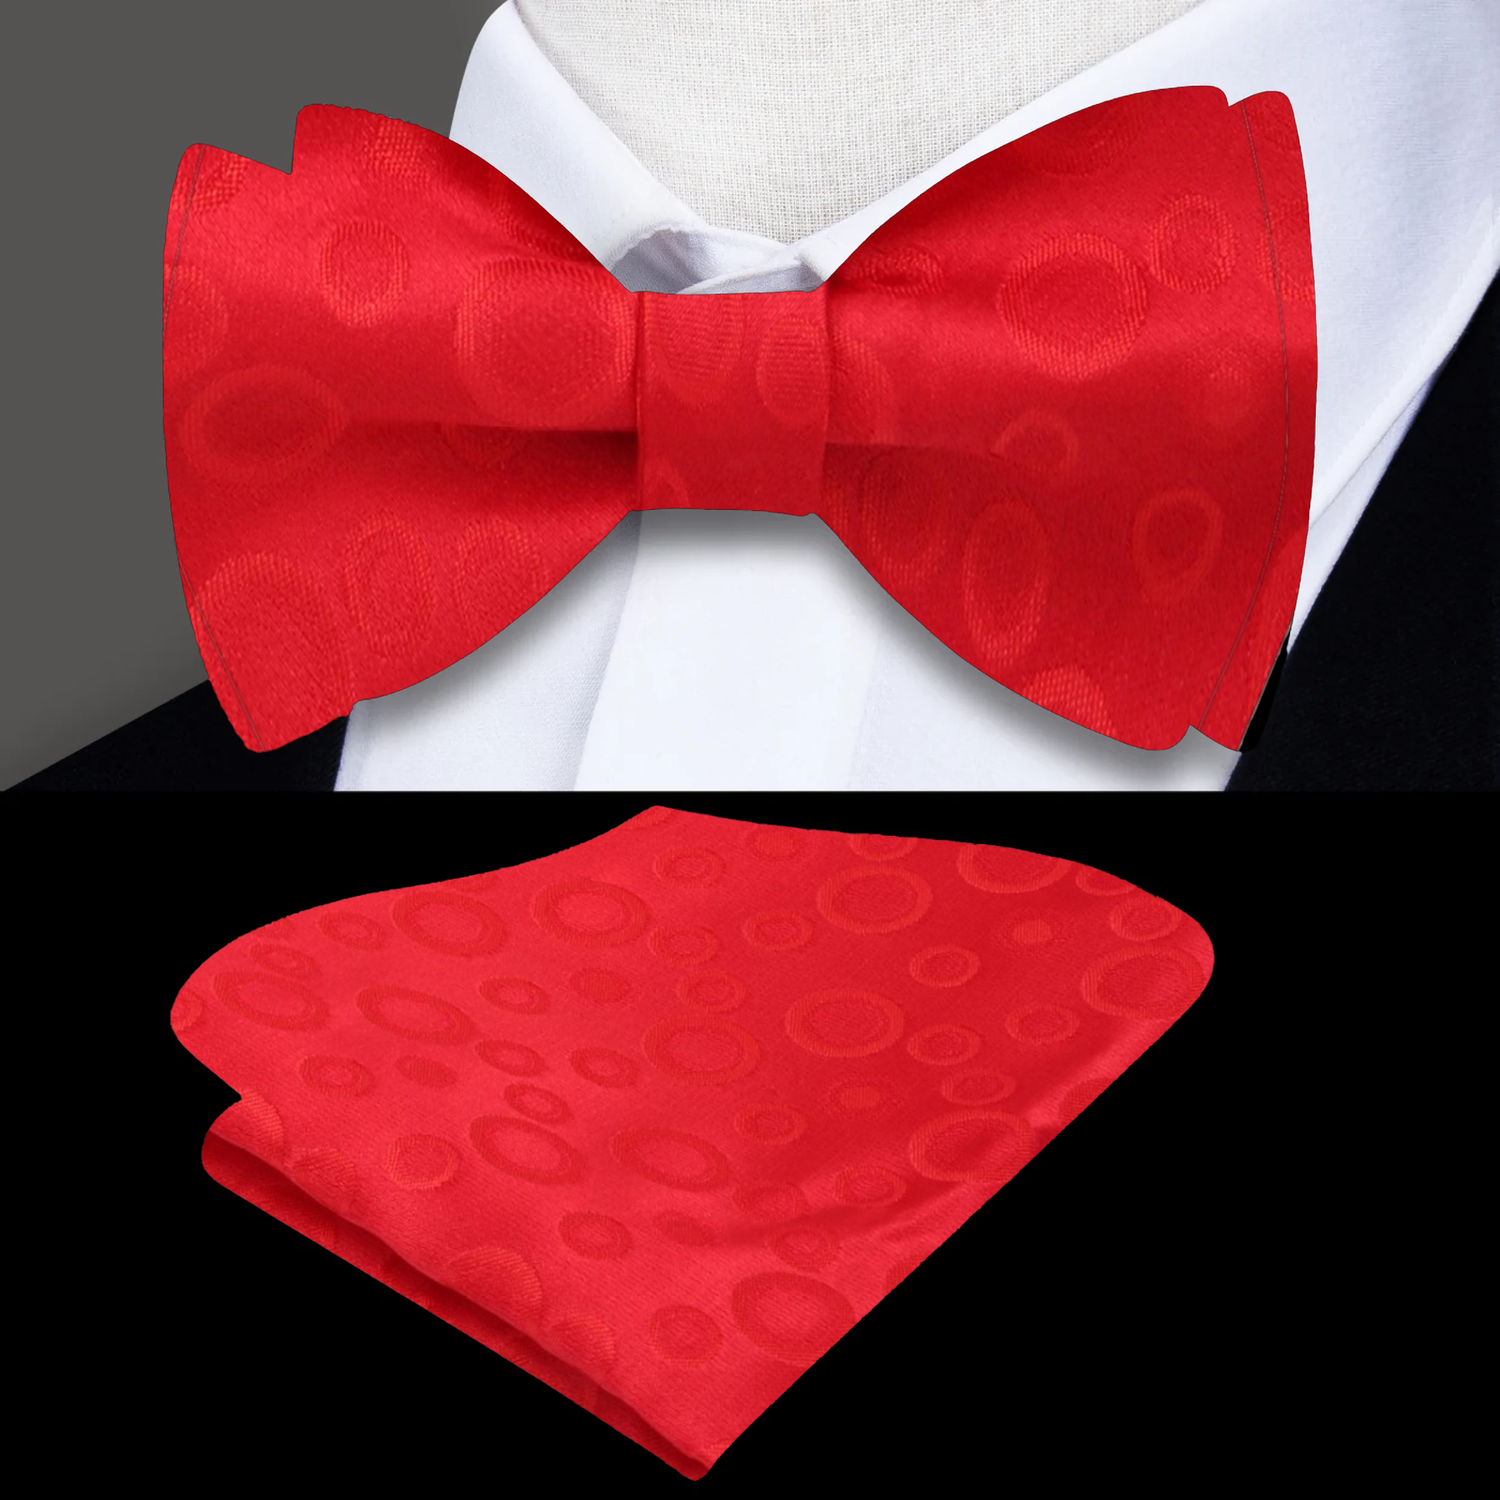 A Red Polka Dot Pattern Silk Self Tie Bow Tie, Matching Pocket Square